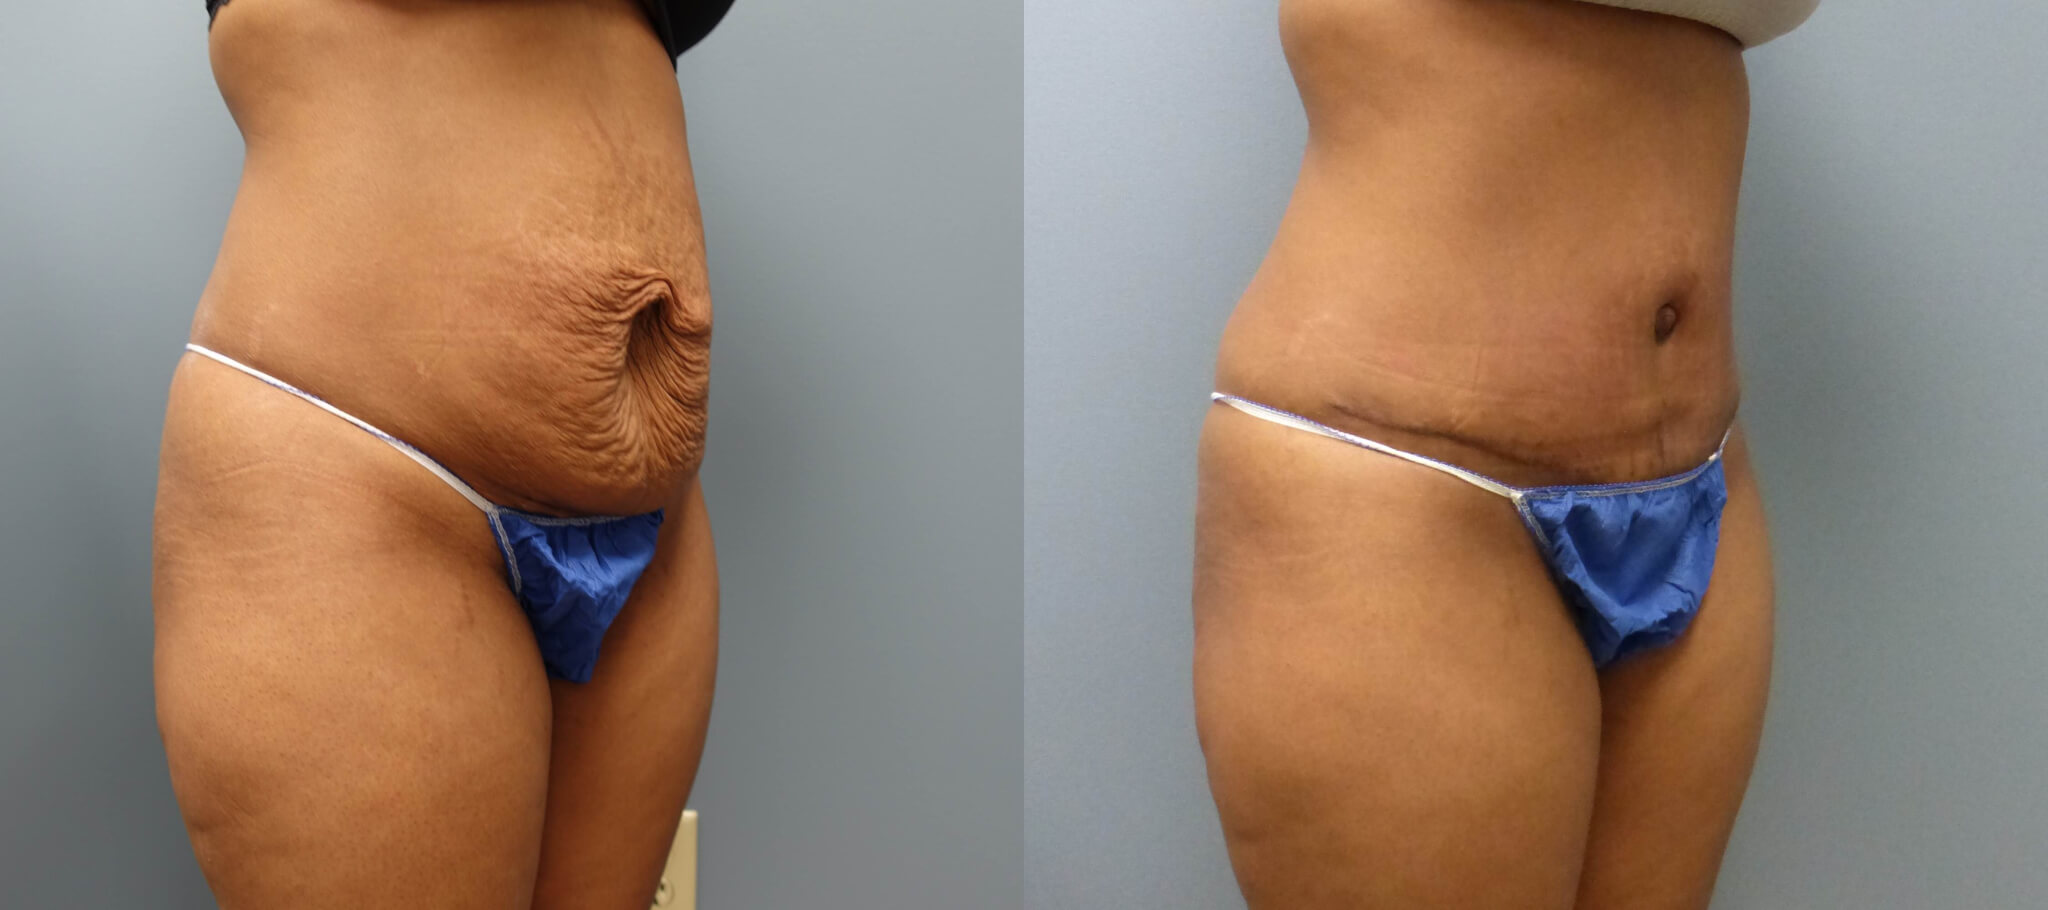 This patient had a  Tummy Tuck without drains and Liposuction by Dr. E. Ronald Finger  